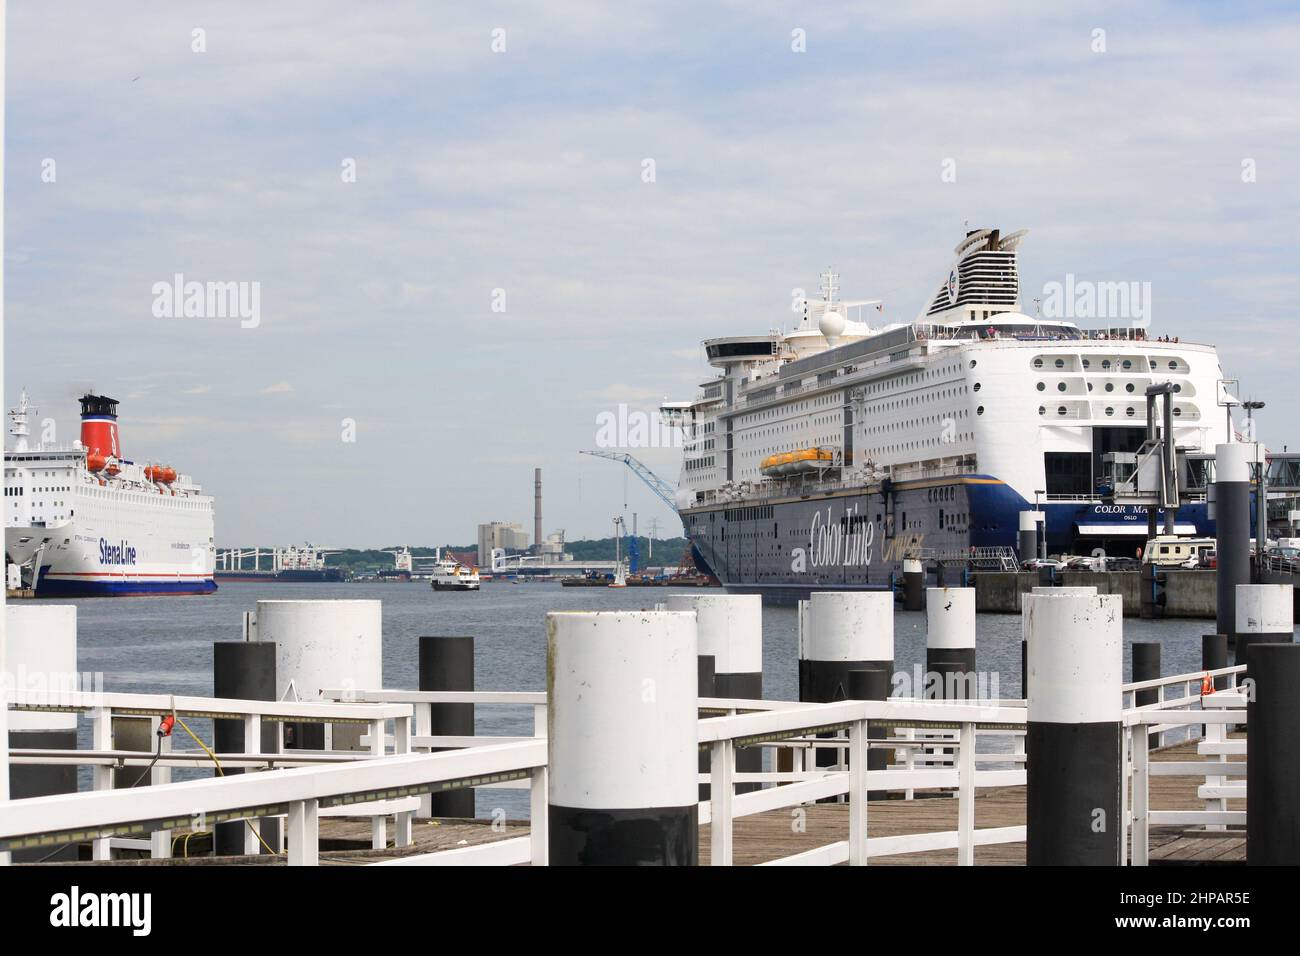 View of large passenger leisure cruise ship docked at the ferry terminal in Kiel Harbor with clouds in blue summer sky background. No people. Stock Photo